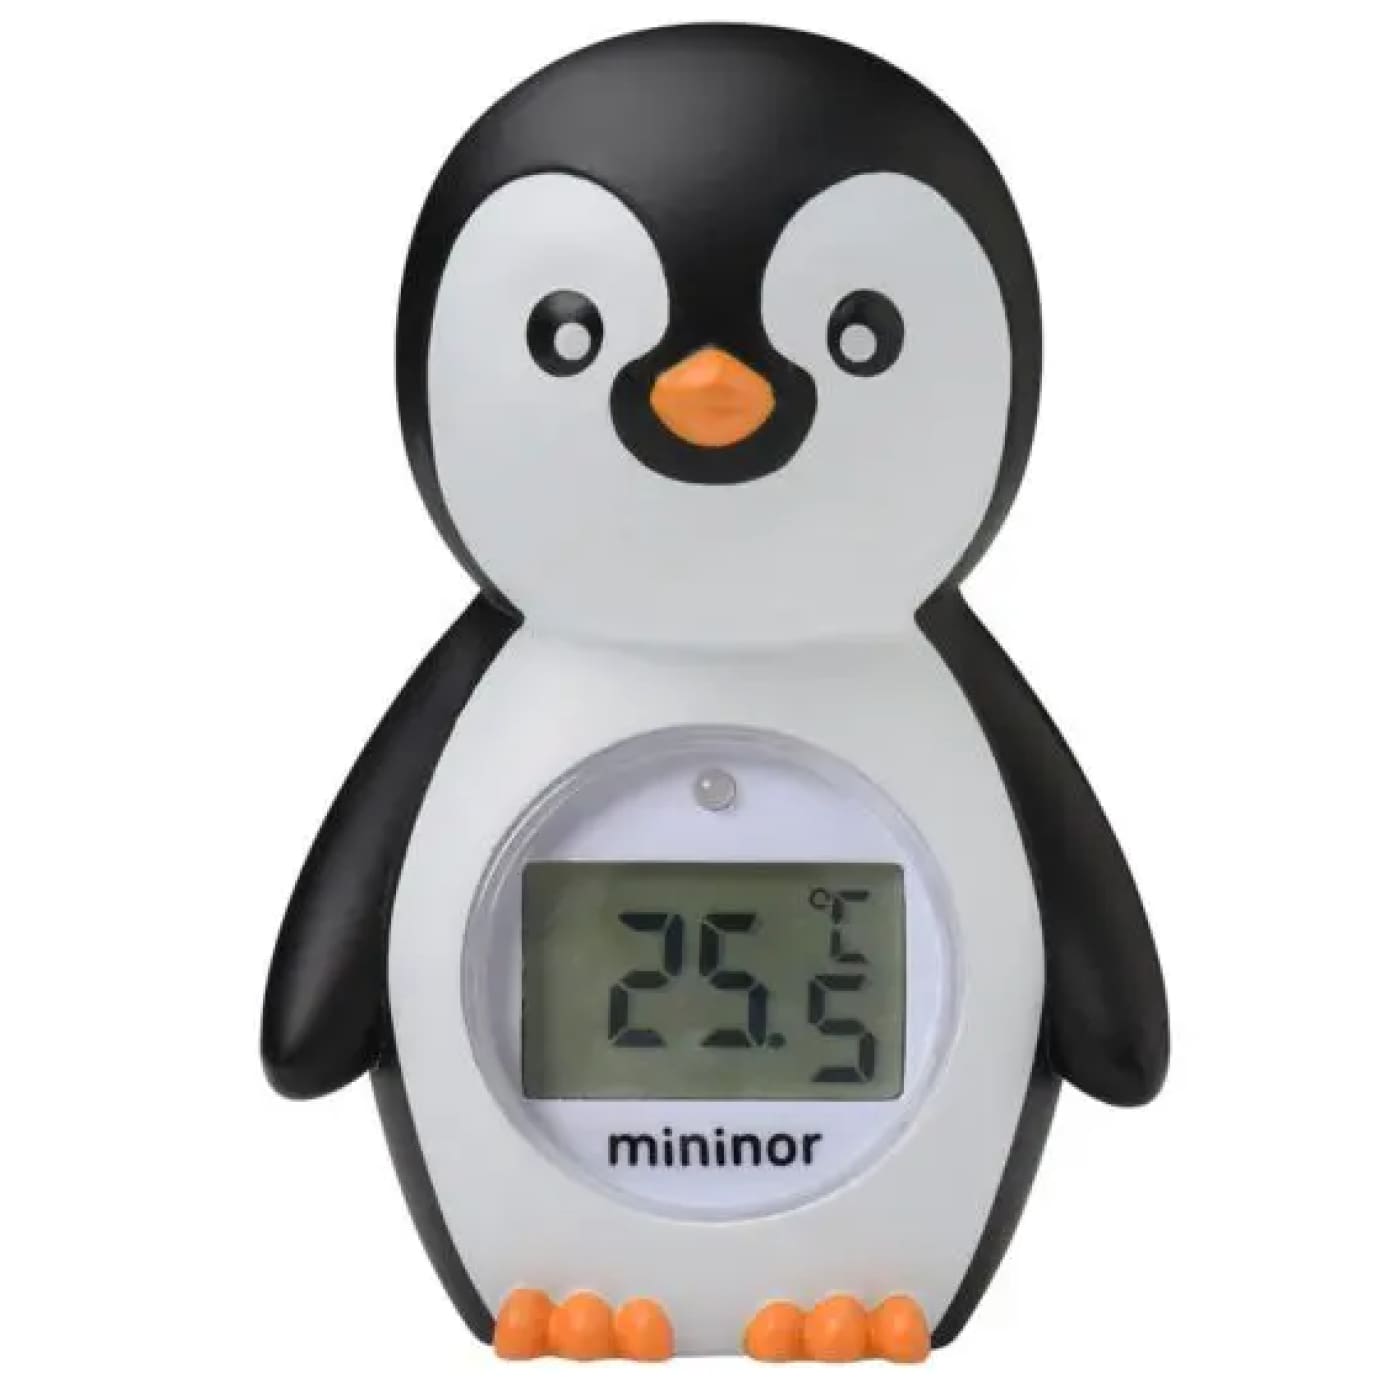 Mininor Bath Thermometer - Penguin - Penguin - HEALTH & HOME SAFETY - THERMOMETERS/MEDICINAL